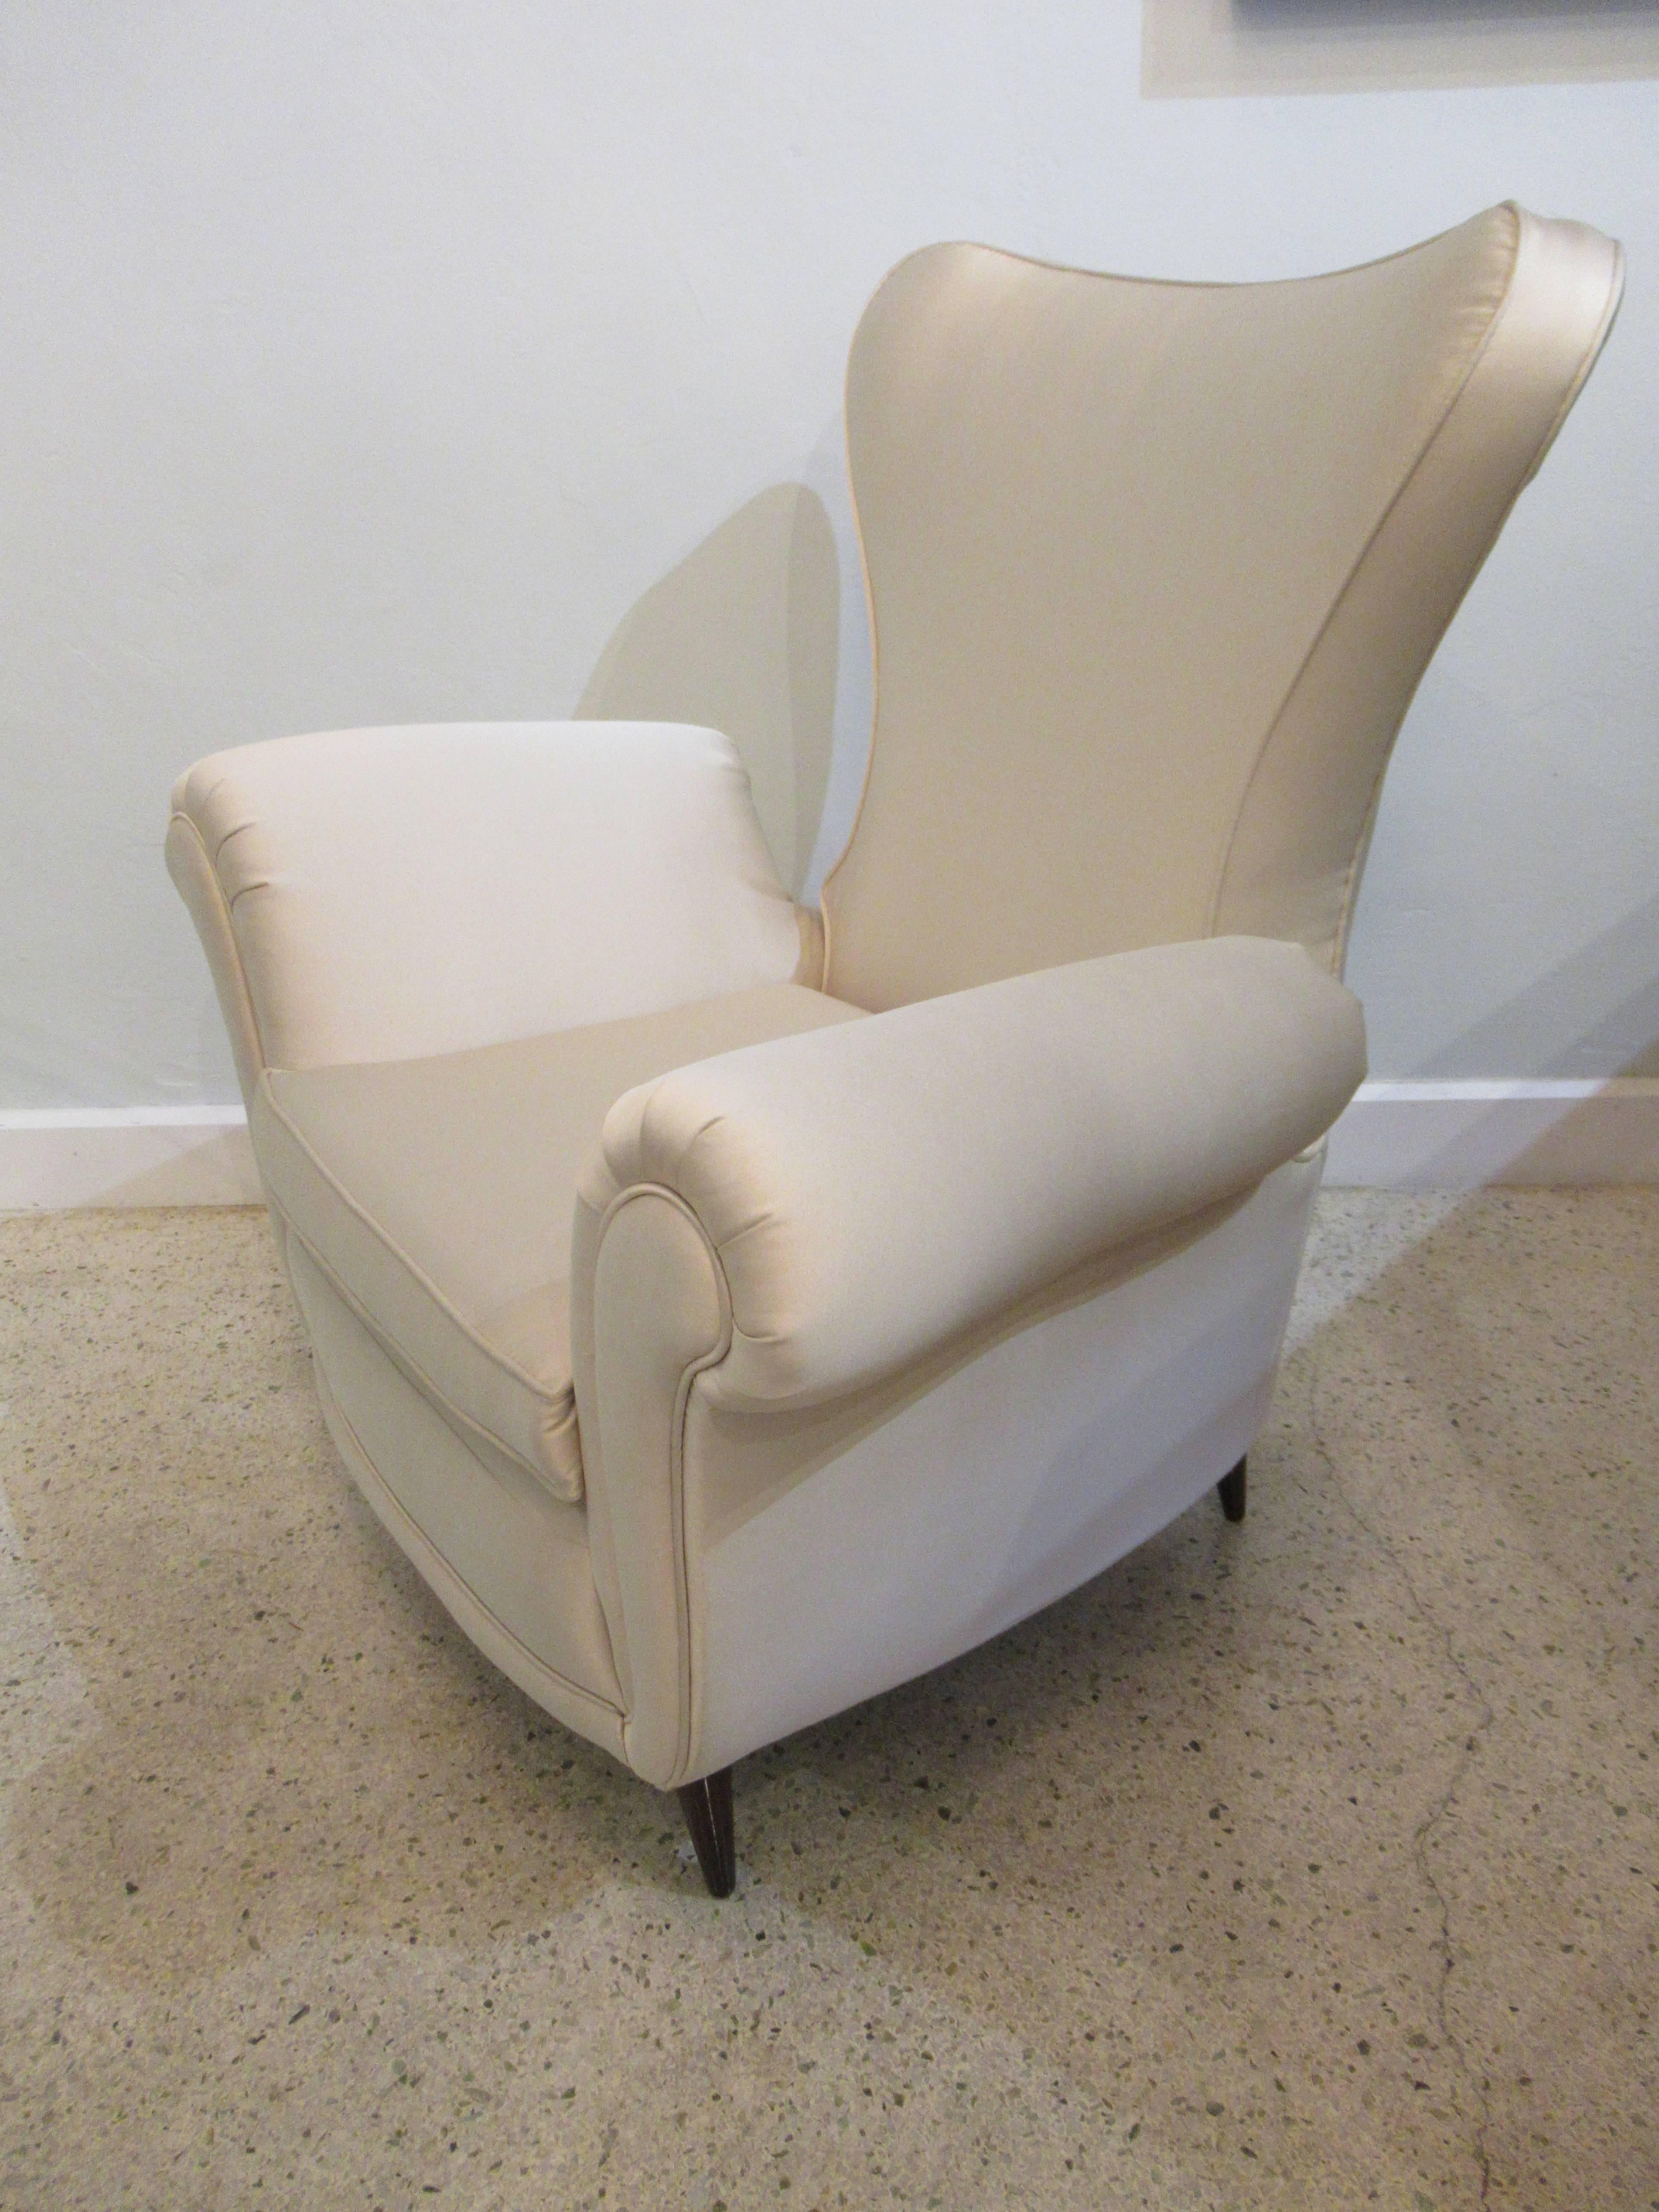 Italian Modern Upholstered Scrolled Arm Occasional Chair, Paolo Buffa, 1950's For Sale 1